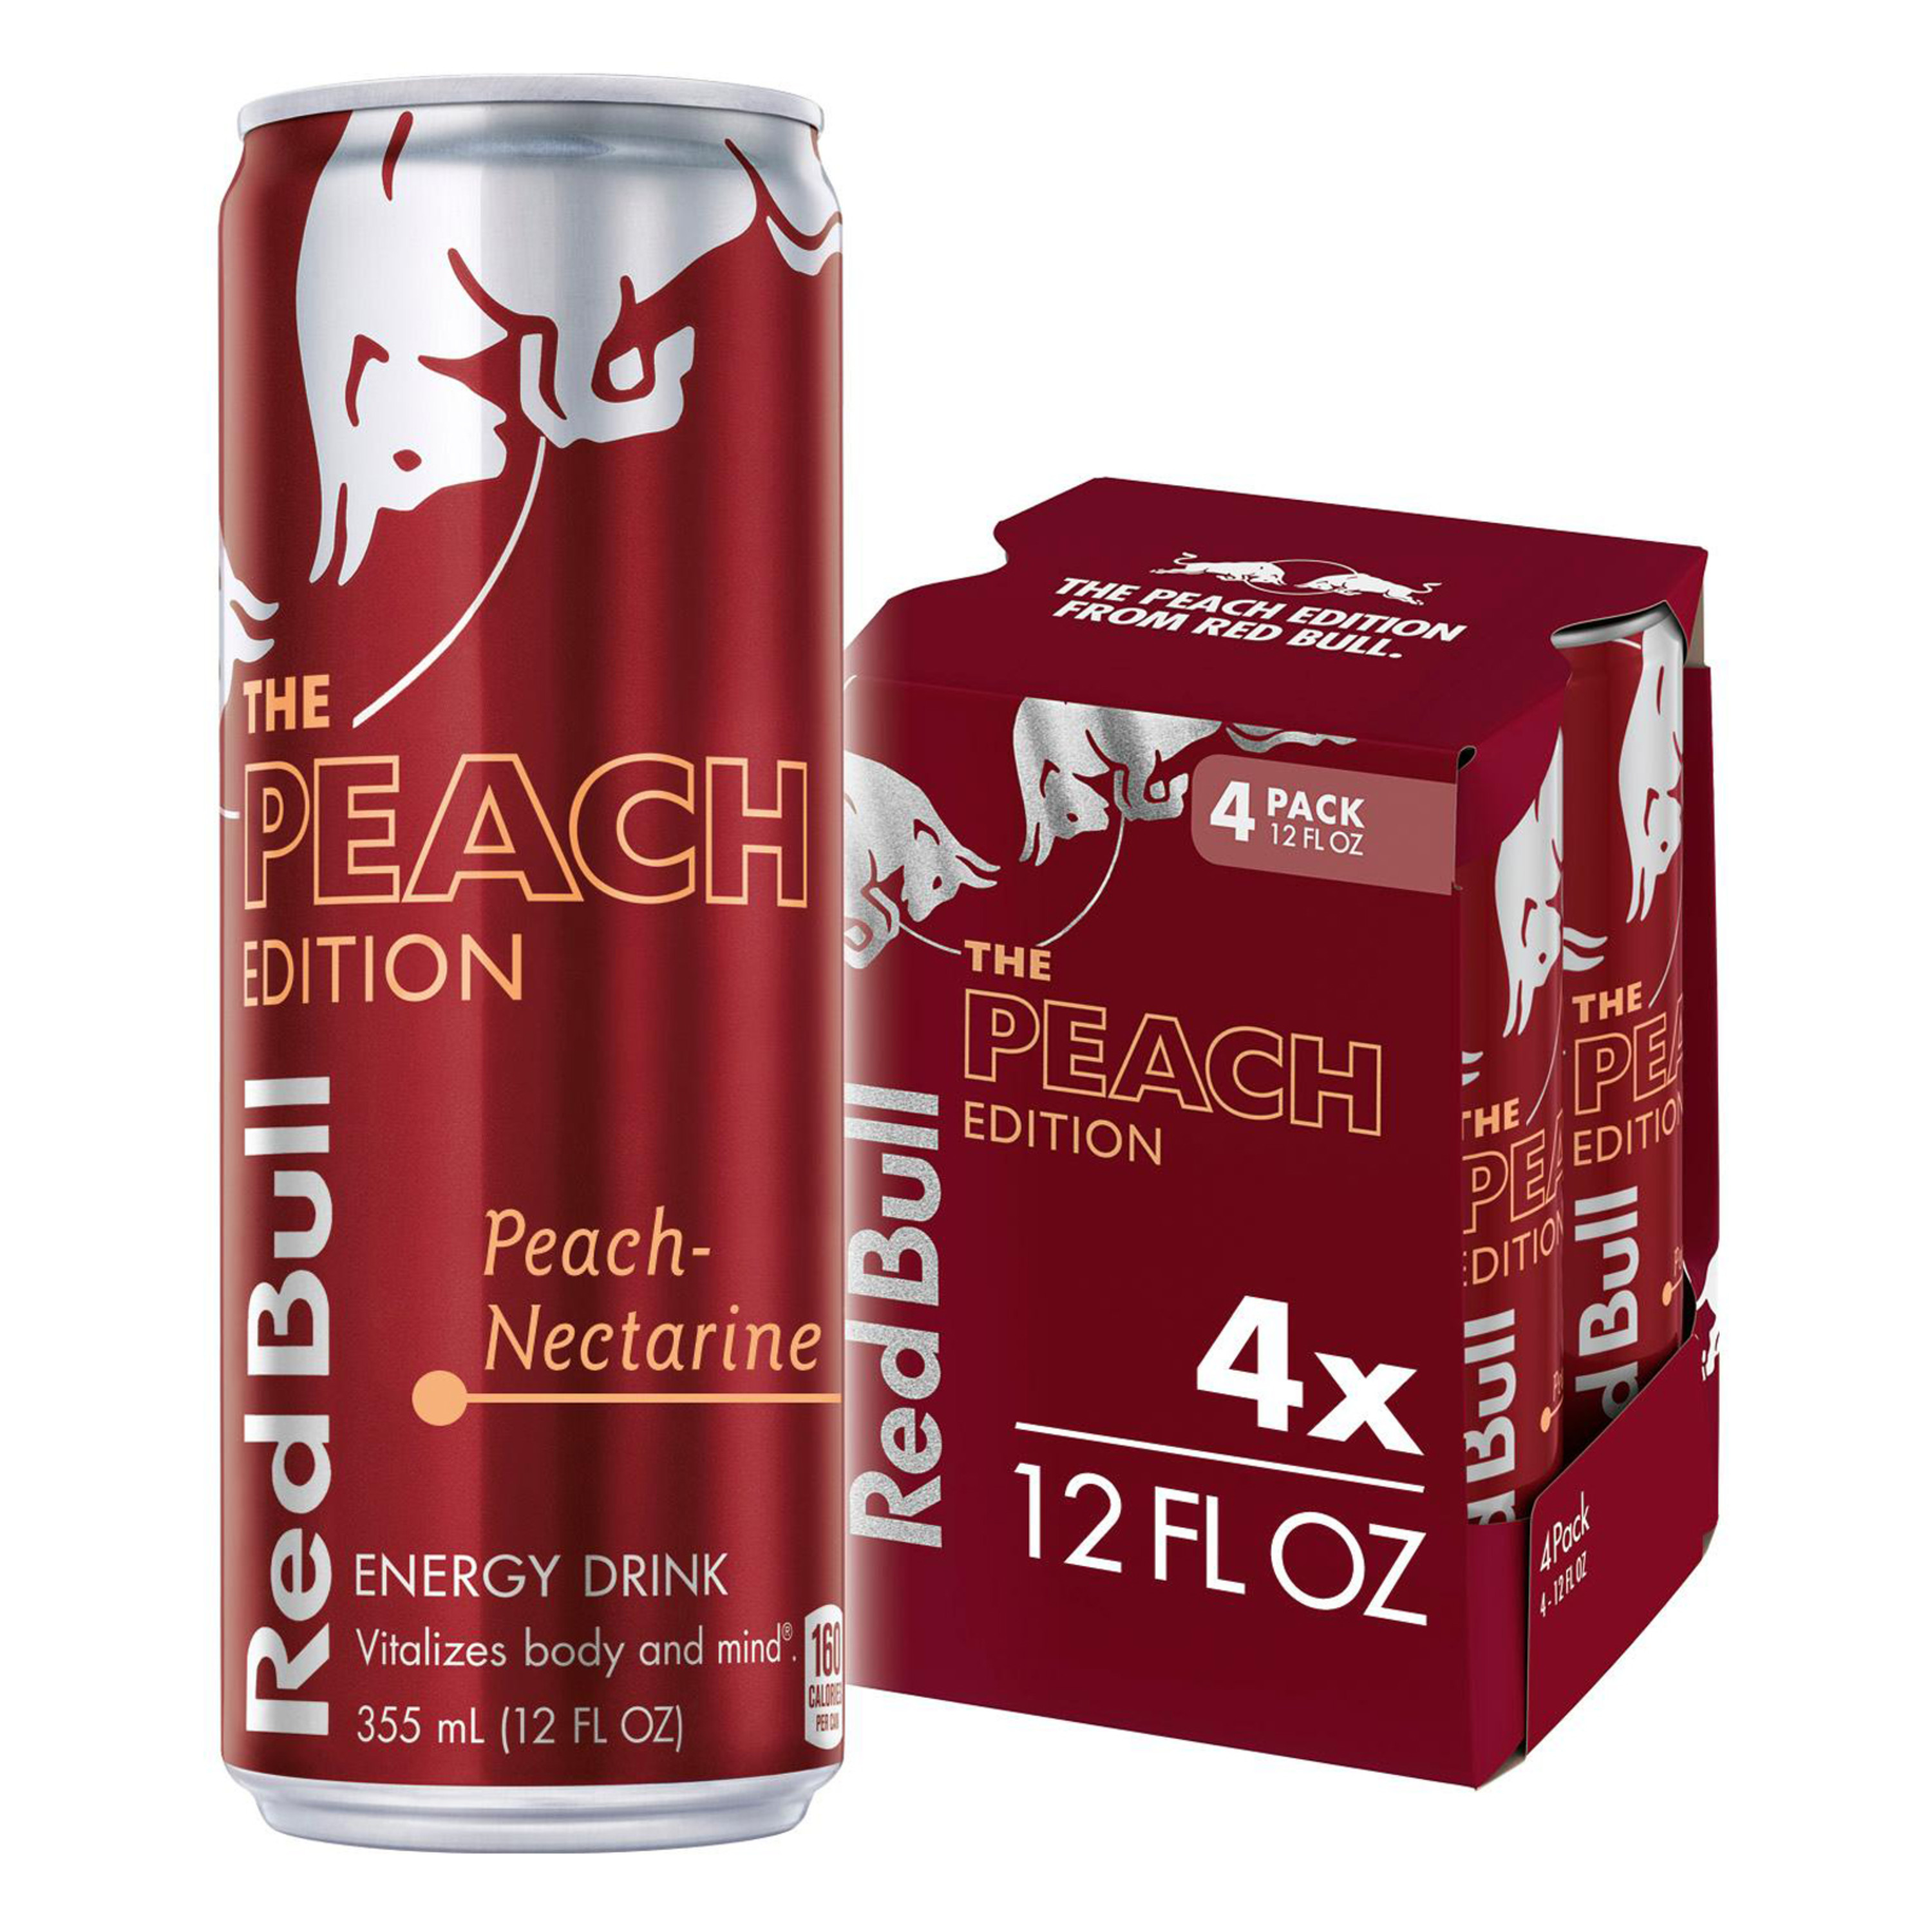 Red Bull Peach Edition Energy Drink, 12 fl oz, Pack of 4 Cans - image 1 of 8